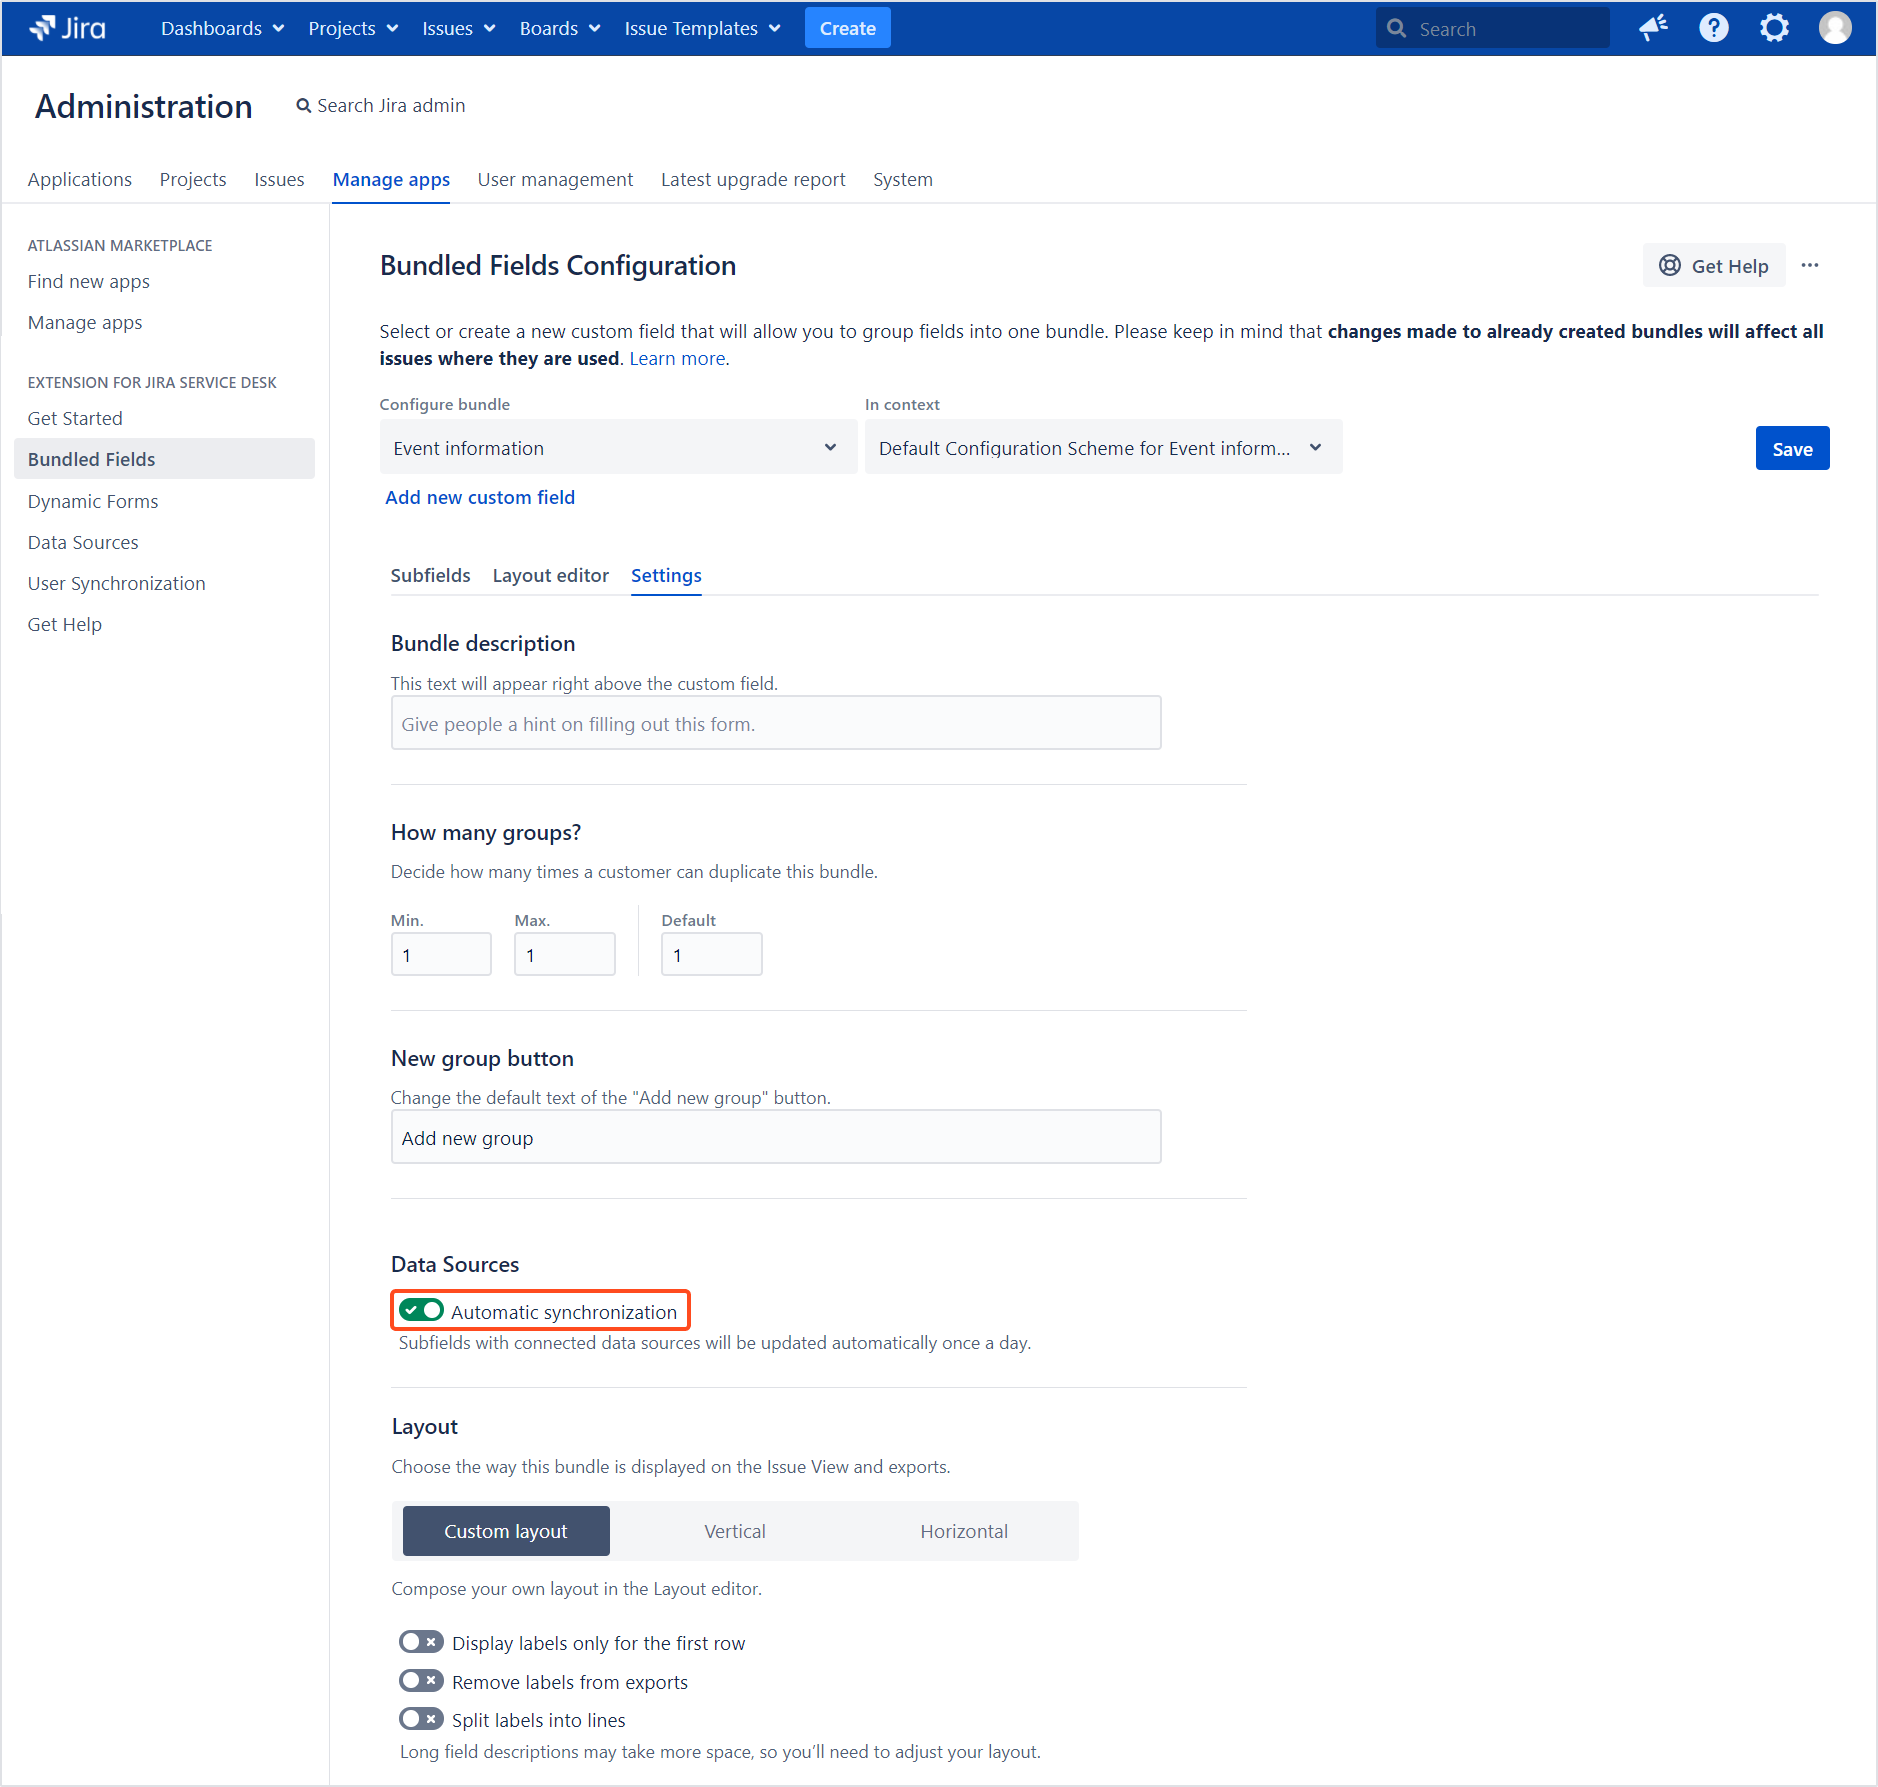 Extension for Jira Service Management - Bundled Fields Data Sources: Automatic synchronization of options